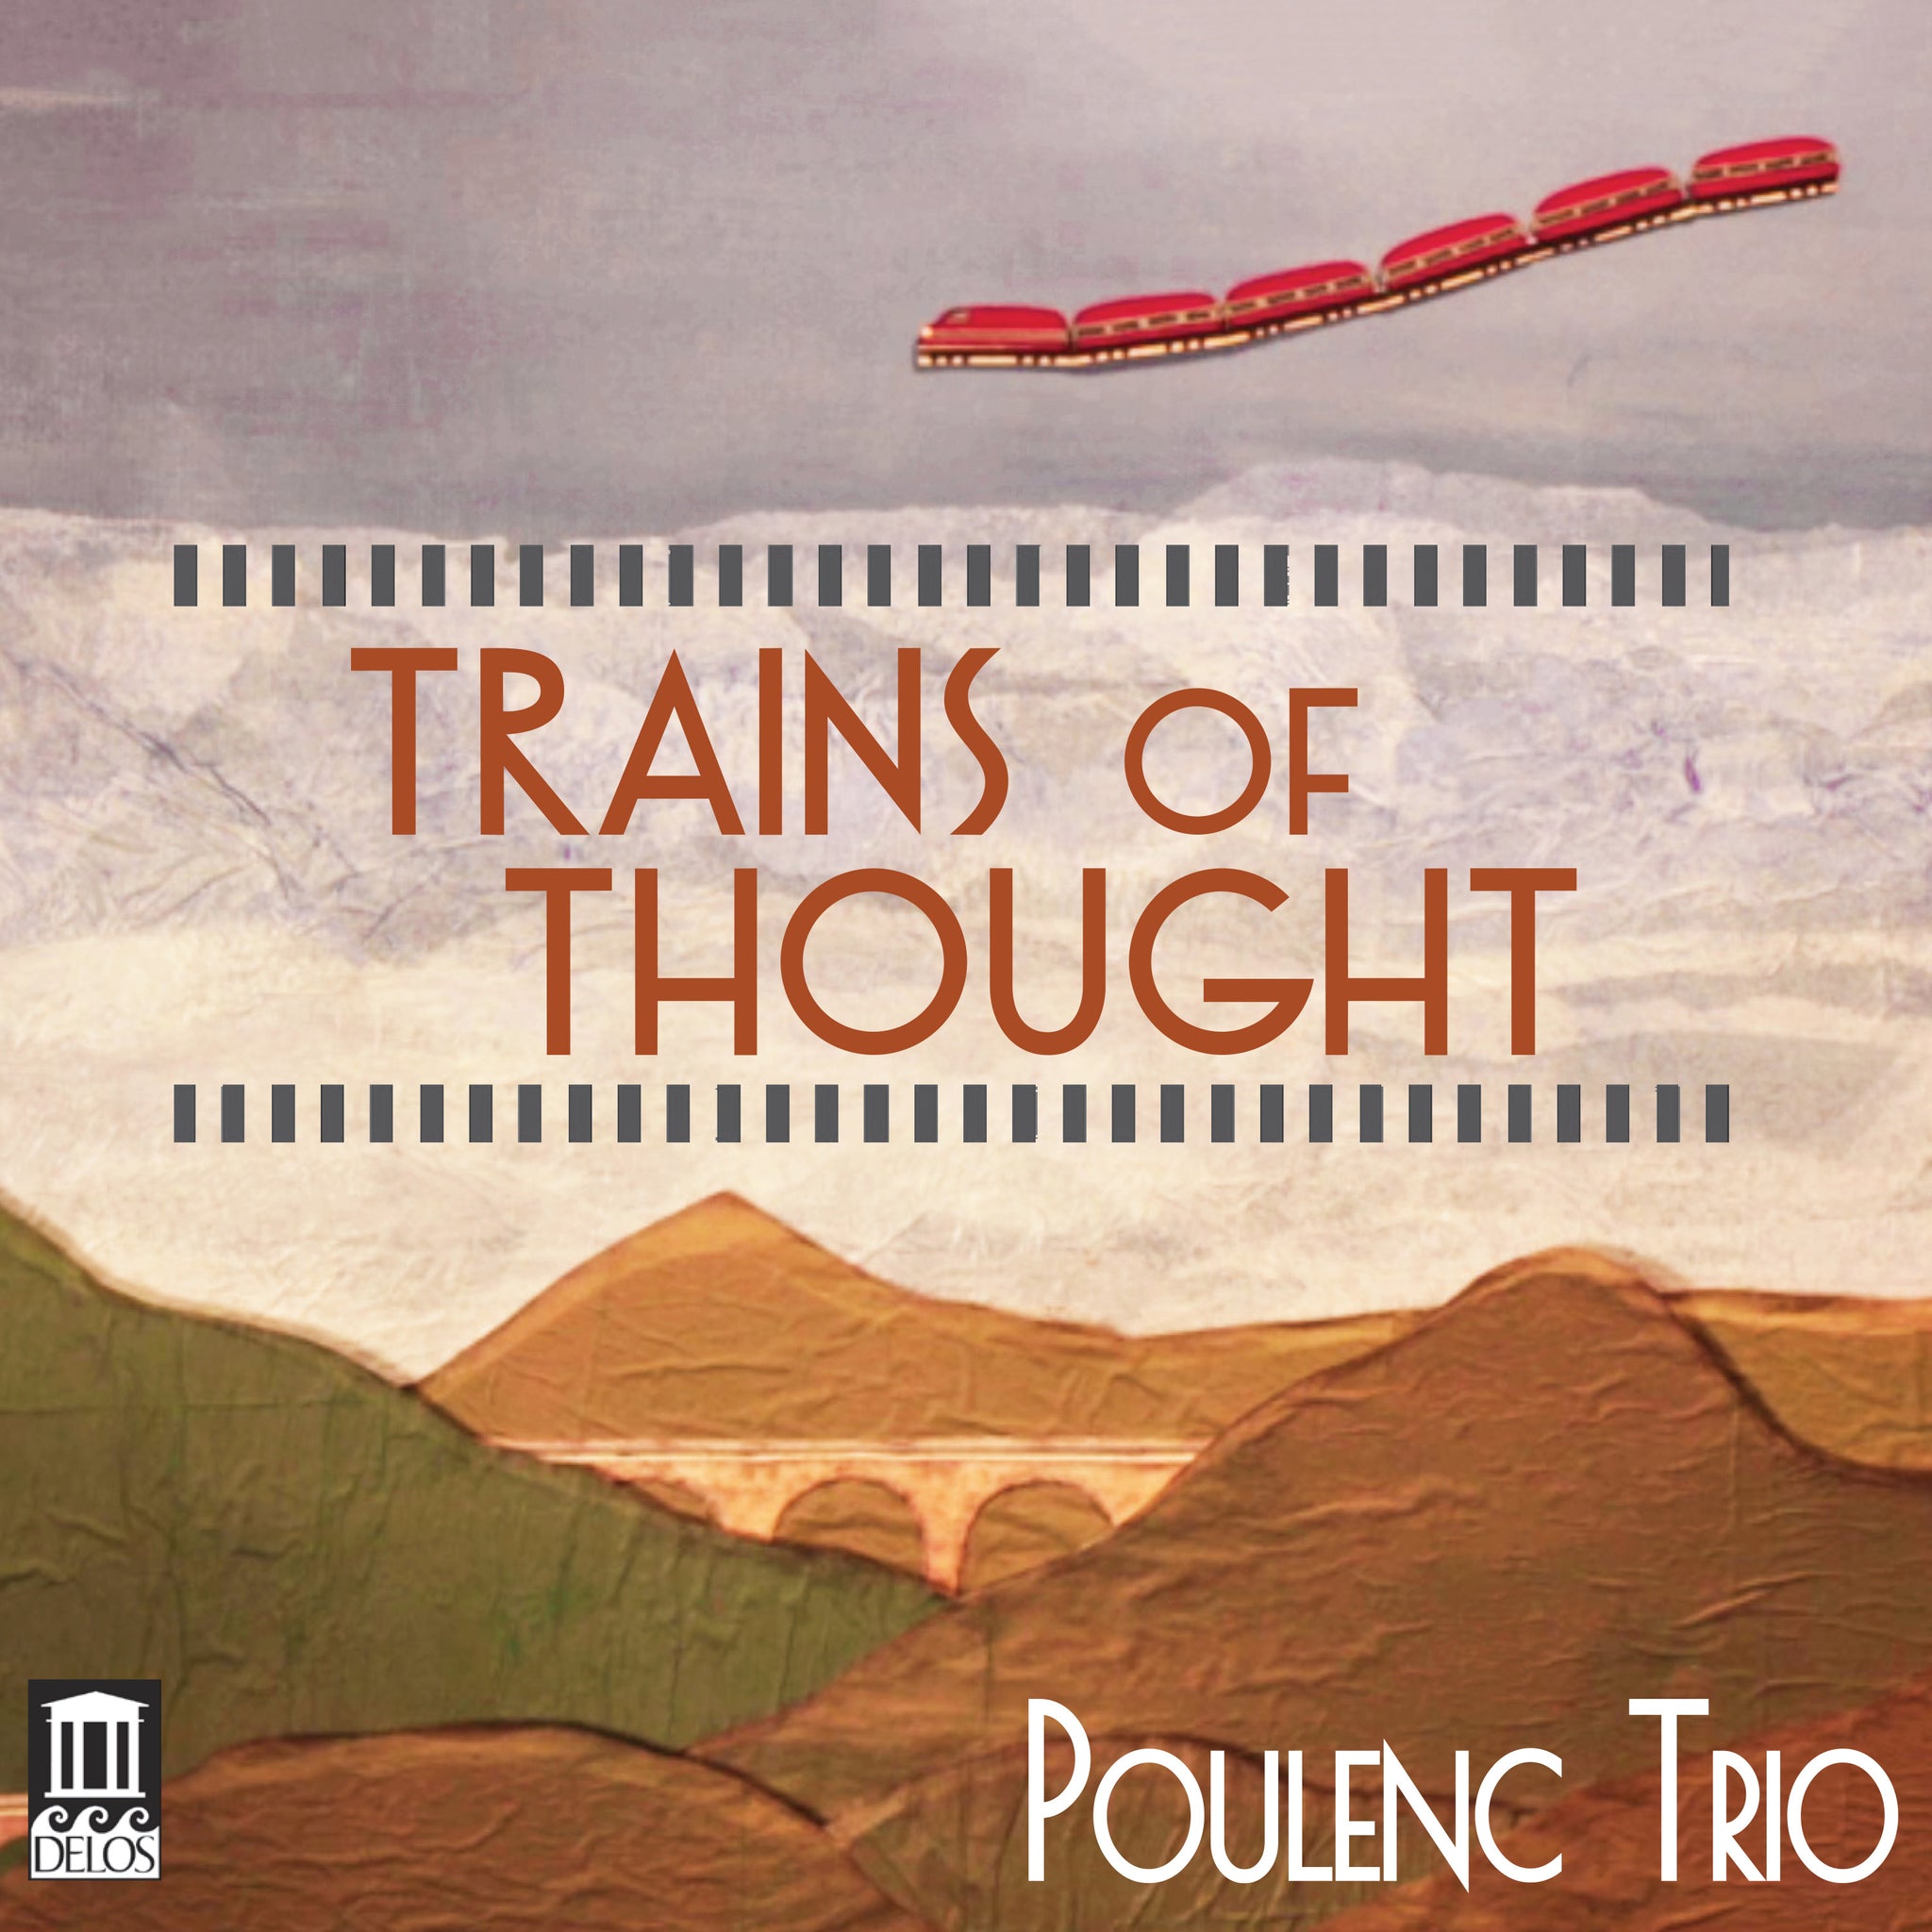 Trains of Thought / Poulenc Trio